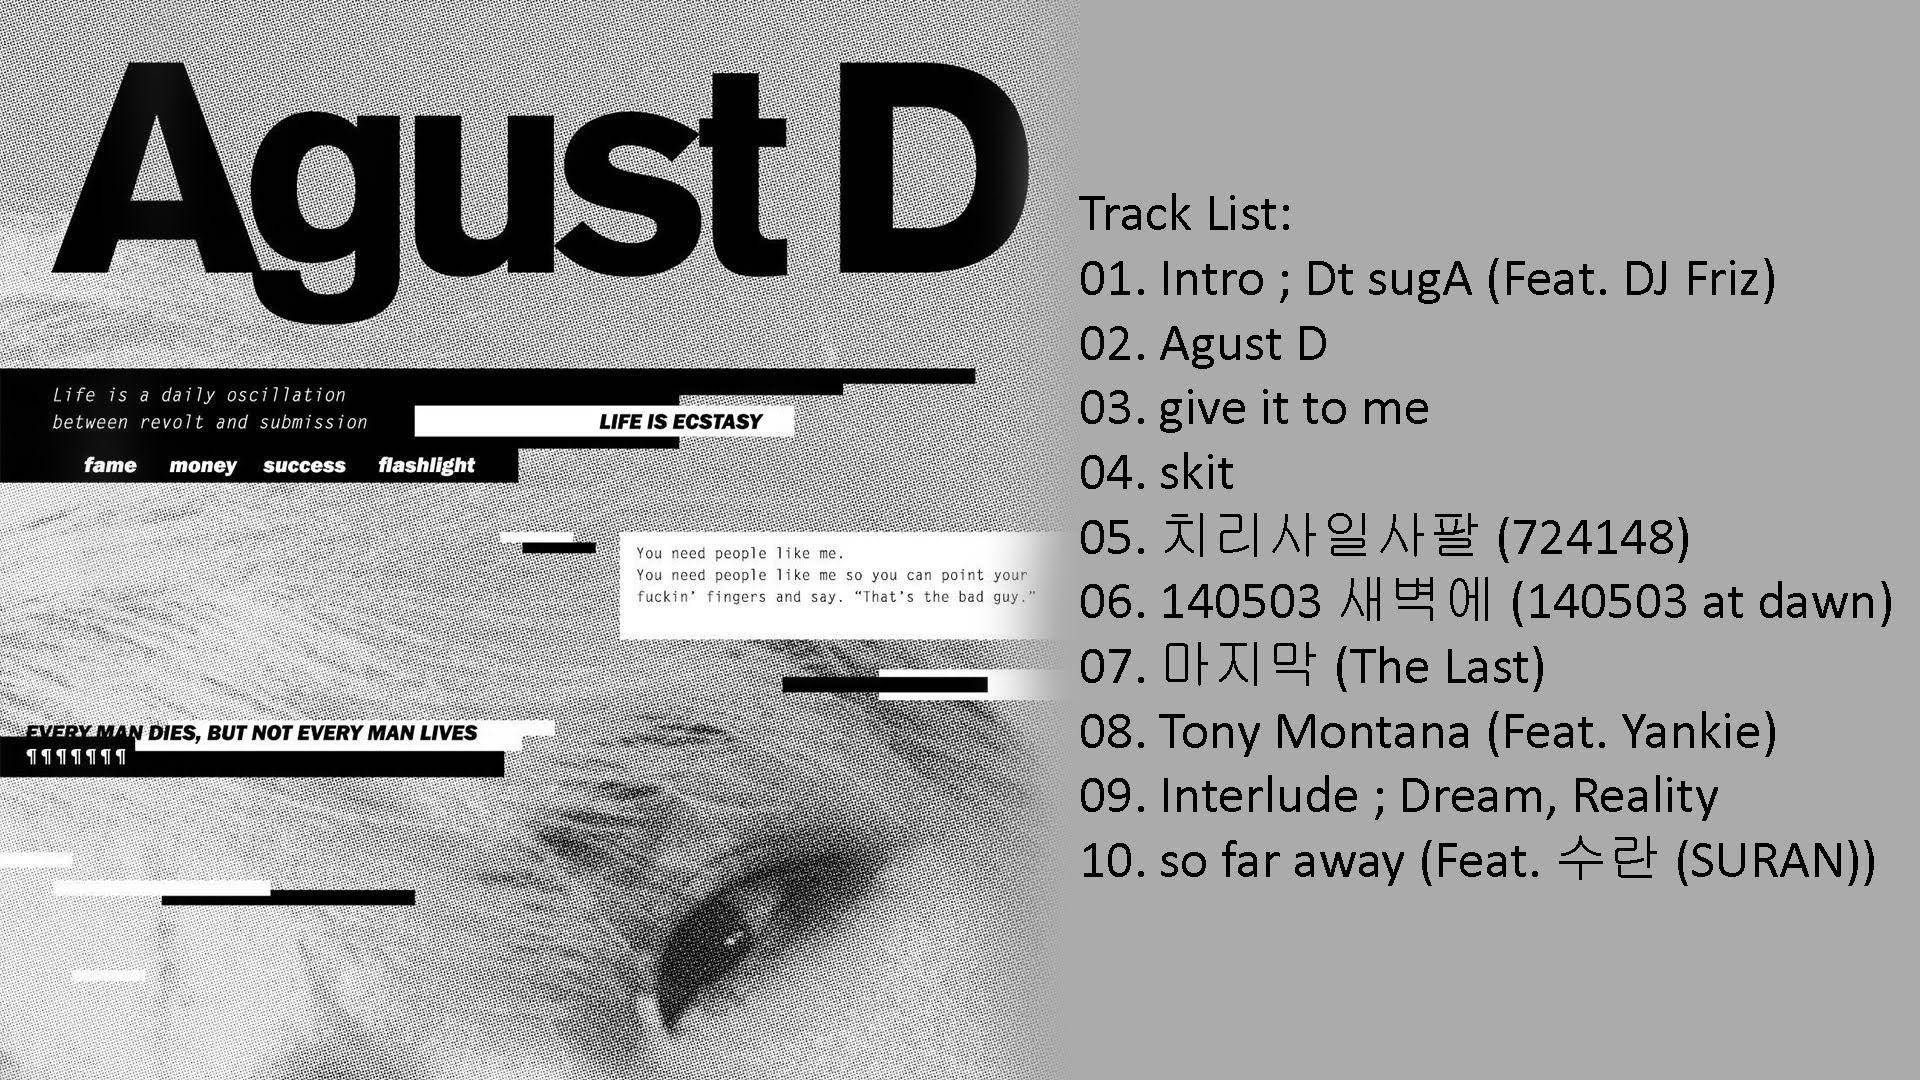 August D - A List Of Songs Background